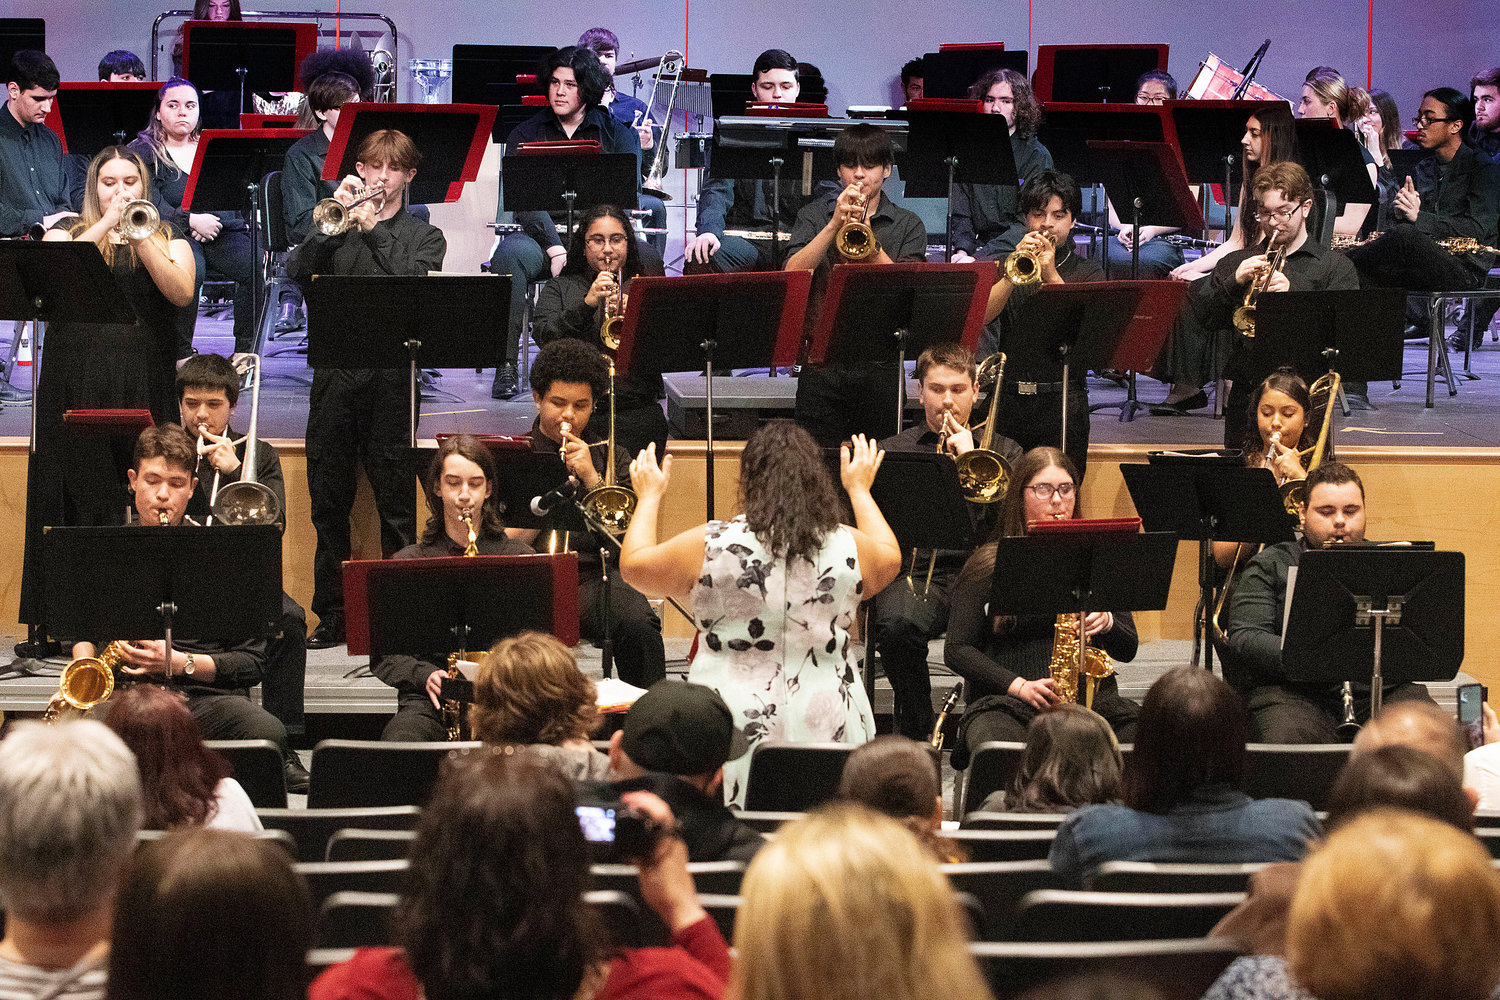 The jazz band performs during the concert.